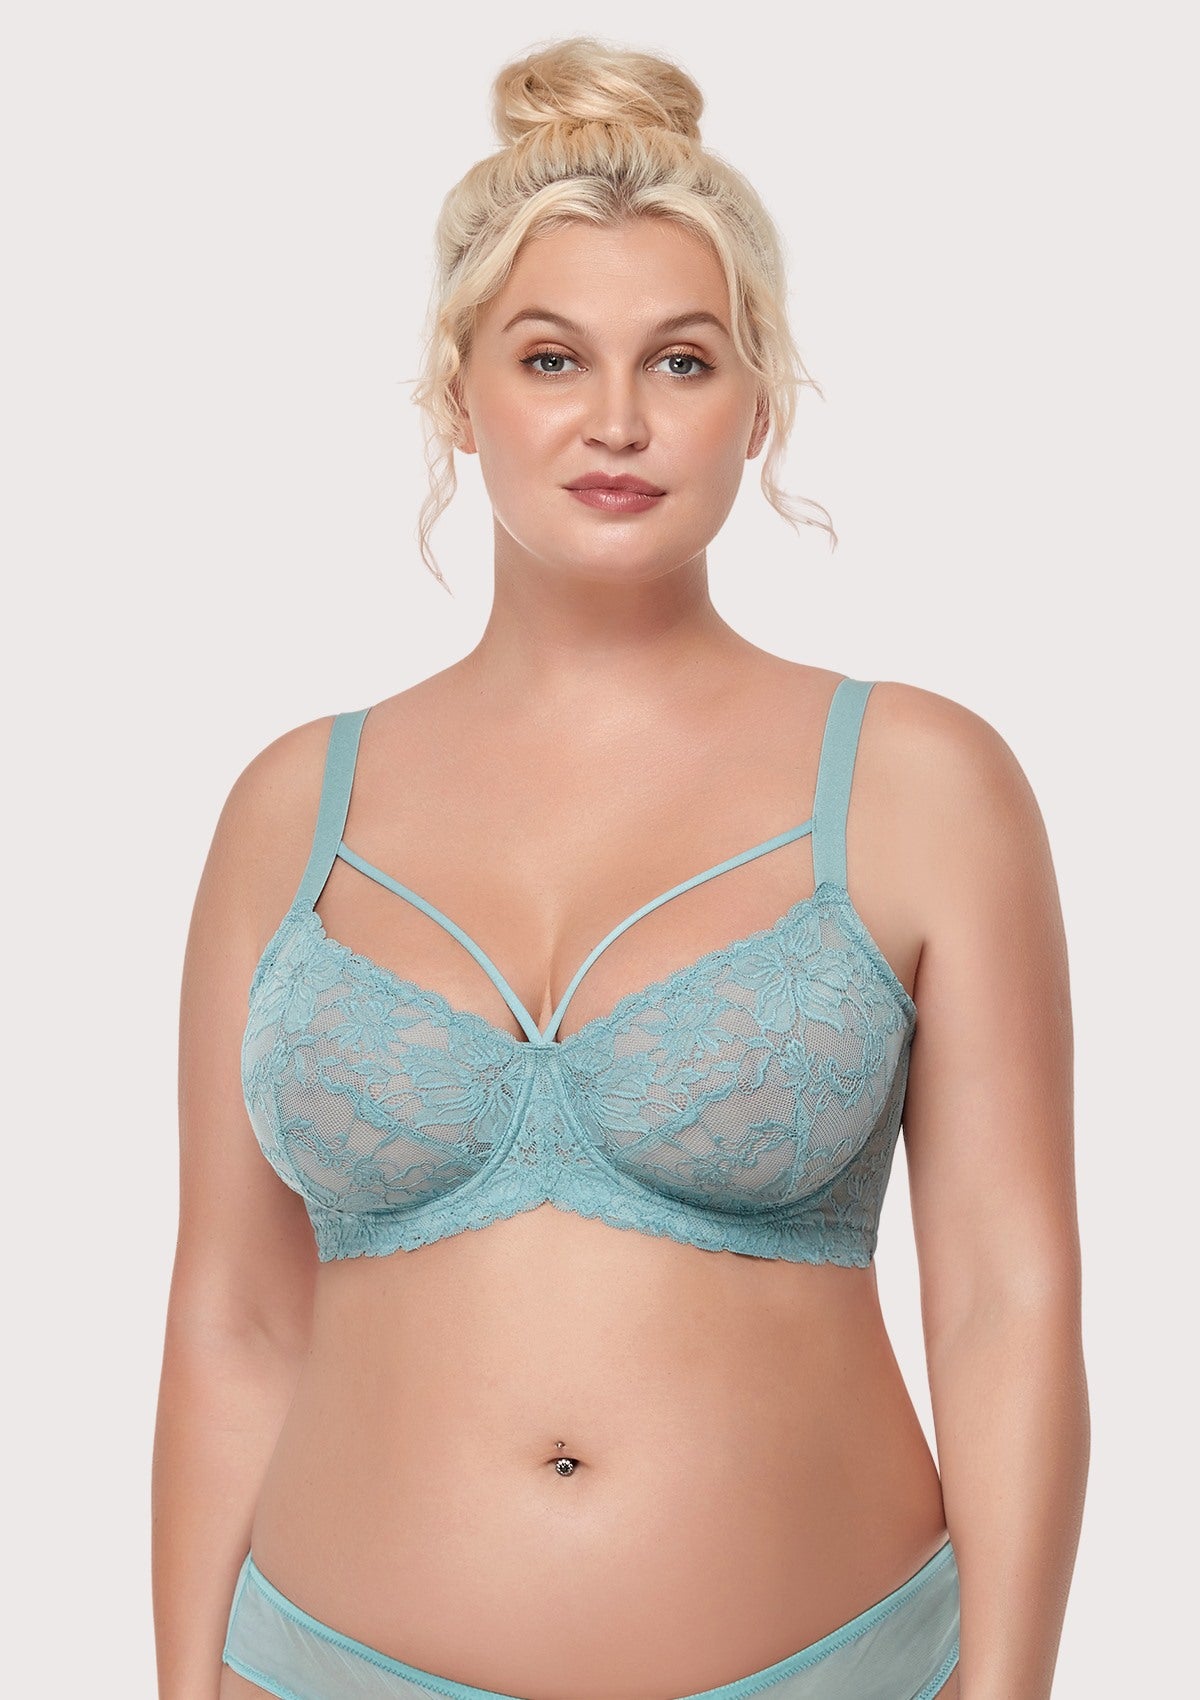 HSIA Pretty In Petals Unlined Lace Bra: Comfortable And Supportive Bra - Pewter Blue / 34 / C